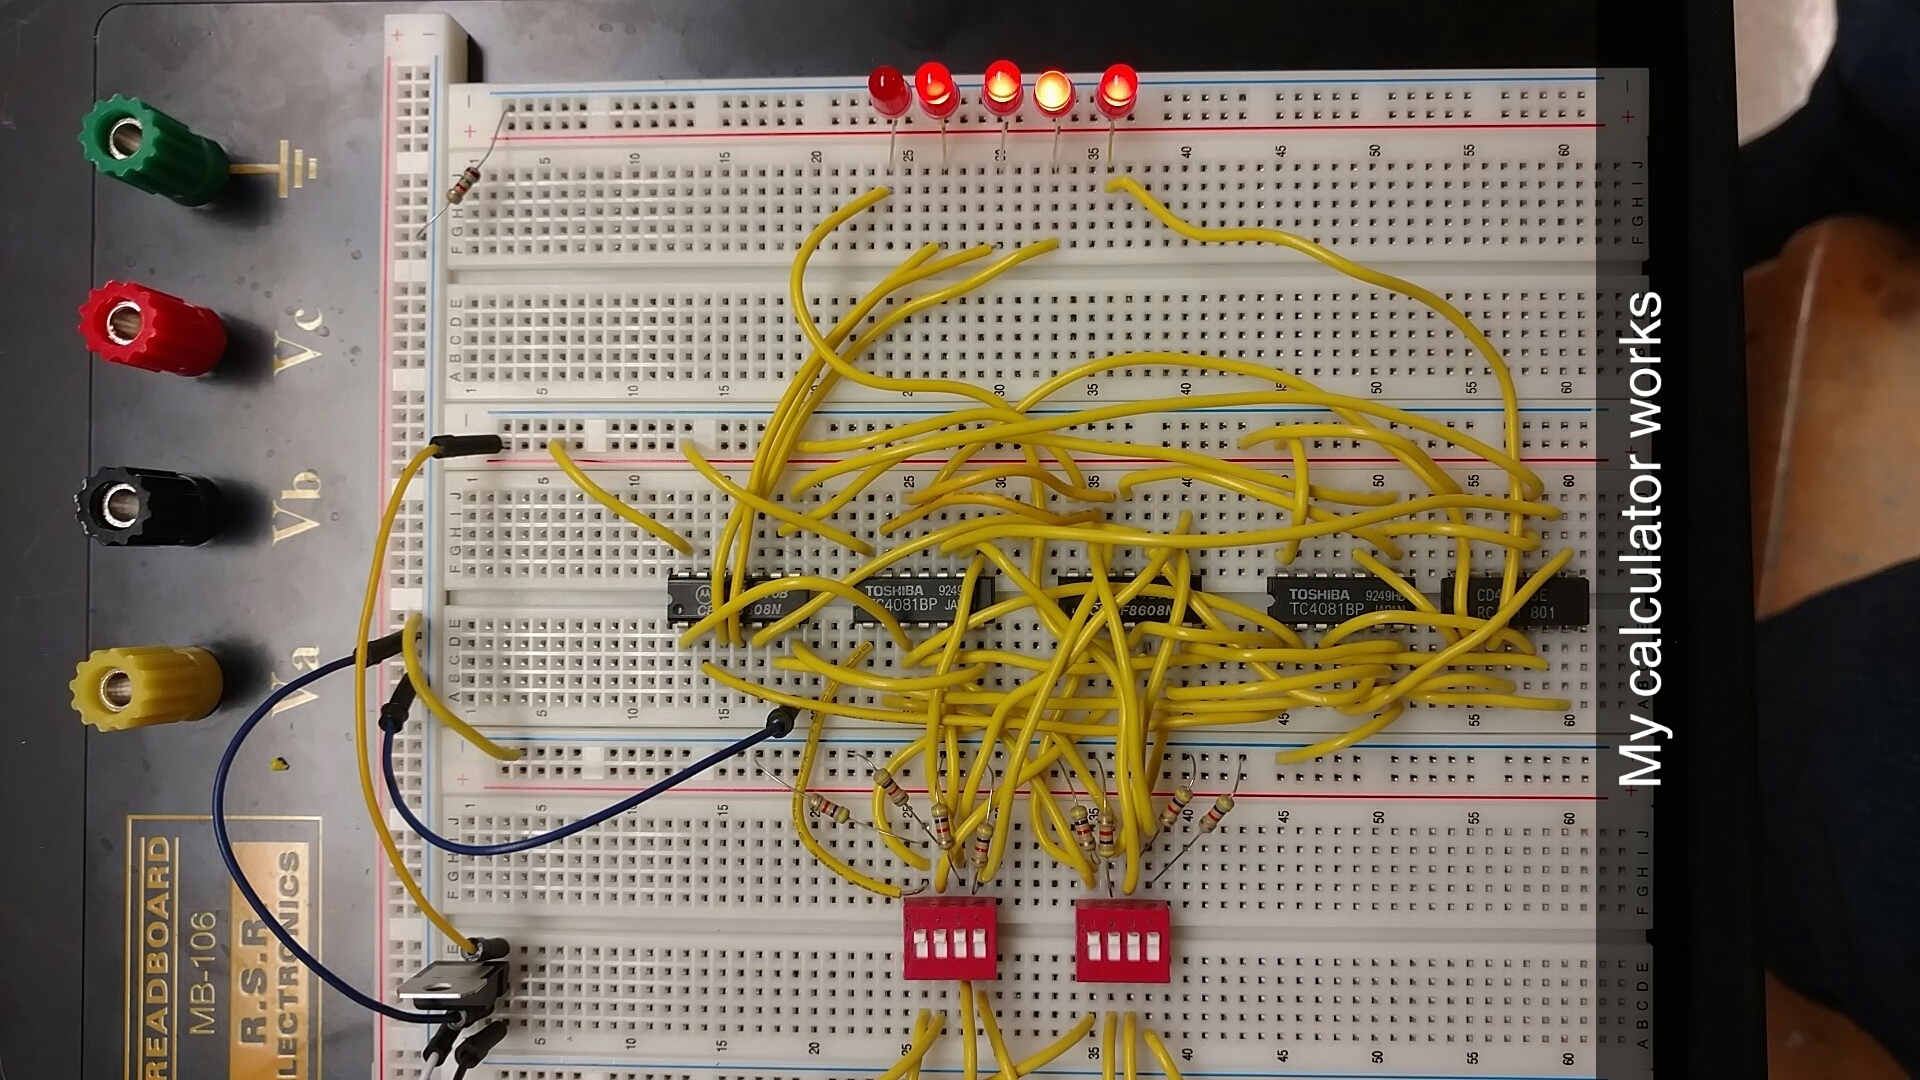 Photo of the 4 bit adder prototyped on a breadboard, a mess of yellow jumper wires are used.